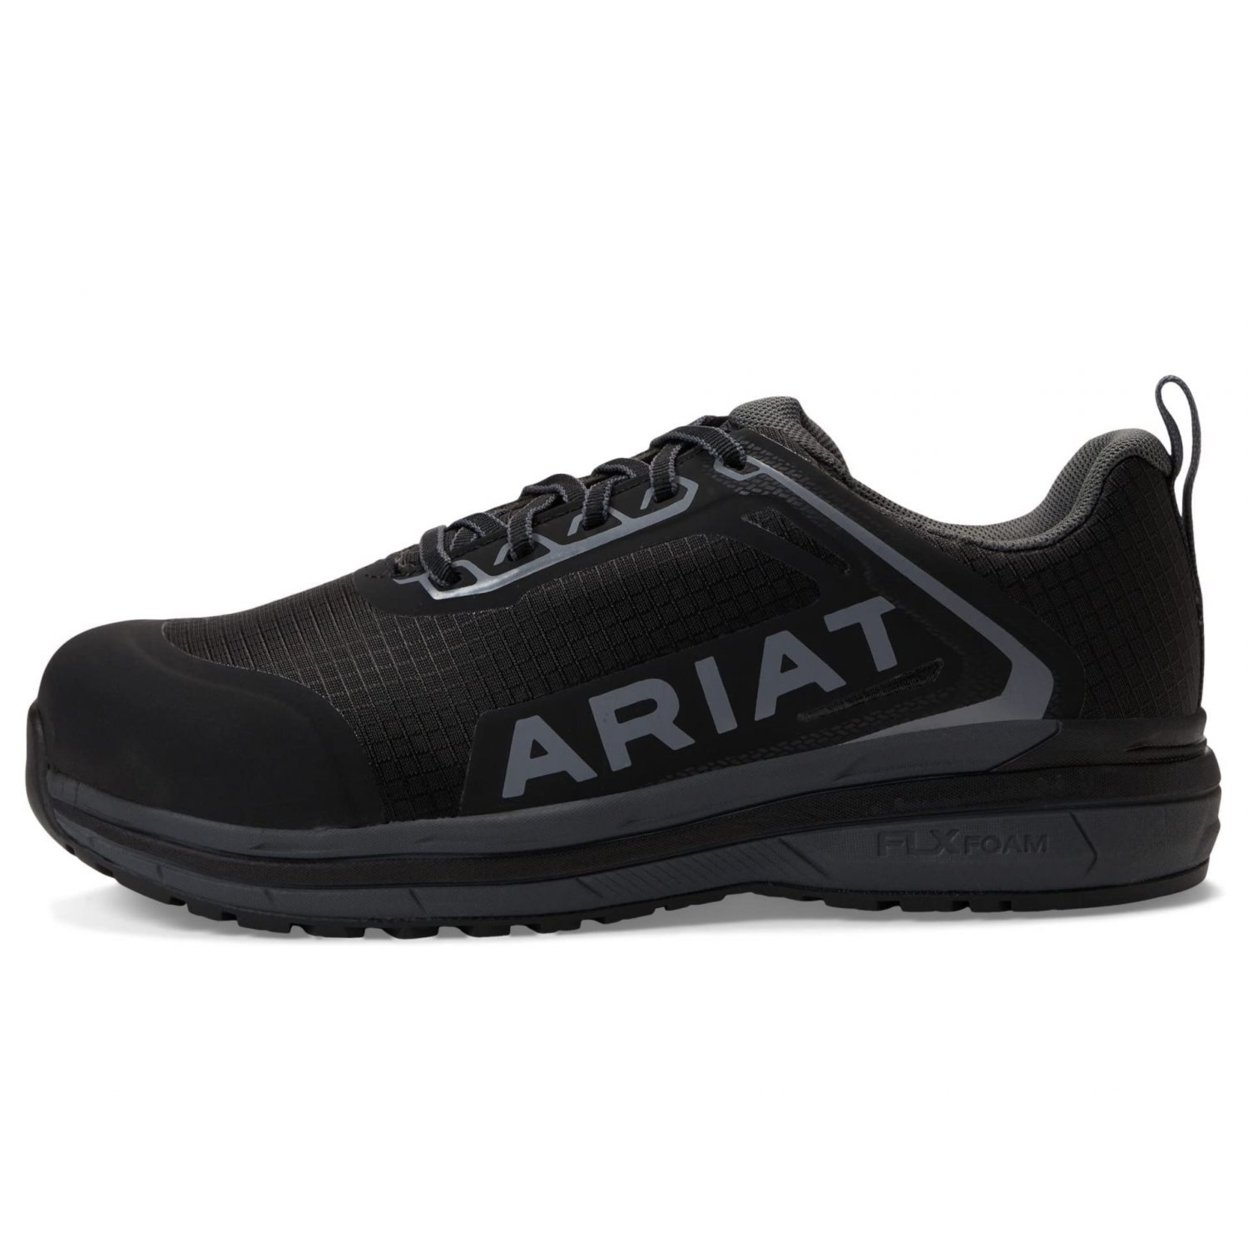 ARIAT Women's Outpace Composite Toe Safety Shoe Fire ONE SIZE BLACK - BLACK, 7.5